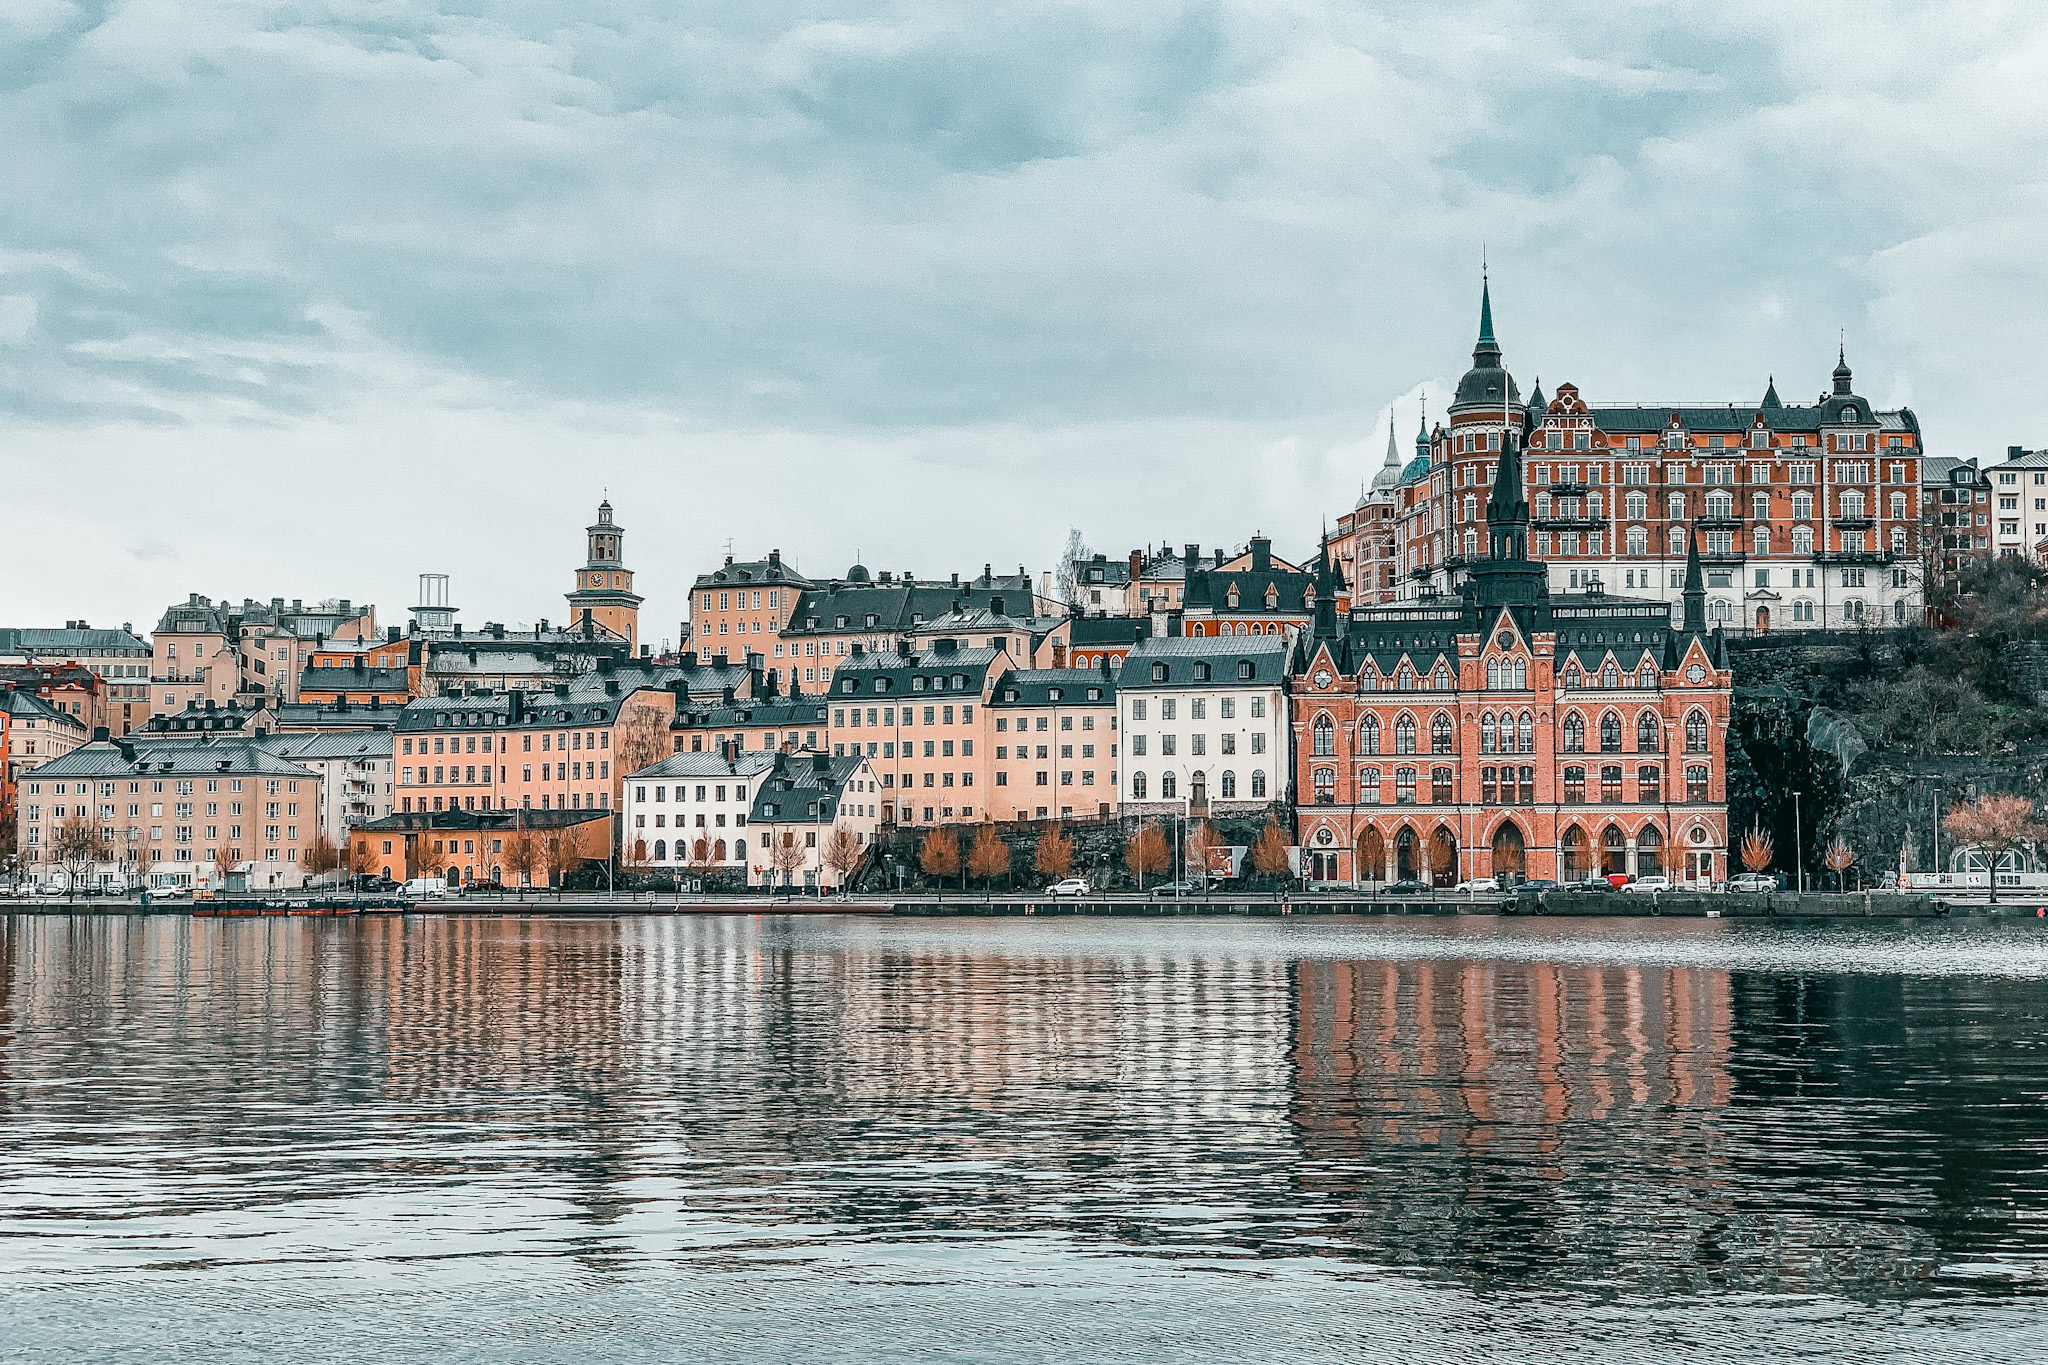 Stockholm is the hottest destination in Sweden thanks to its beautiful architecture..